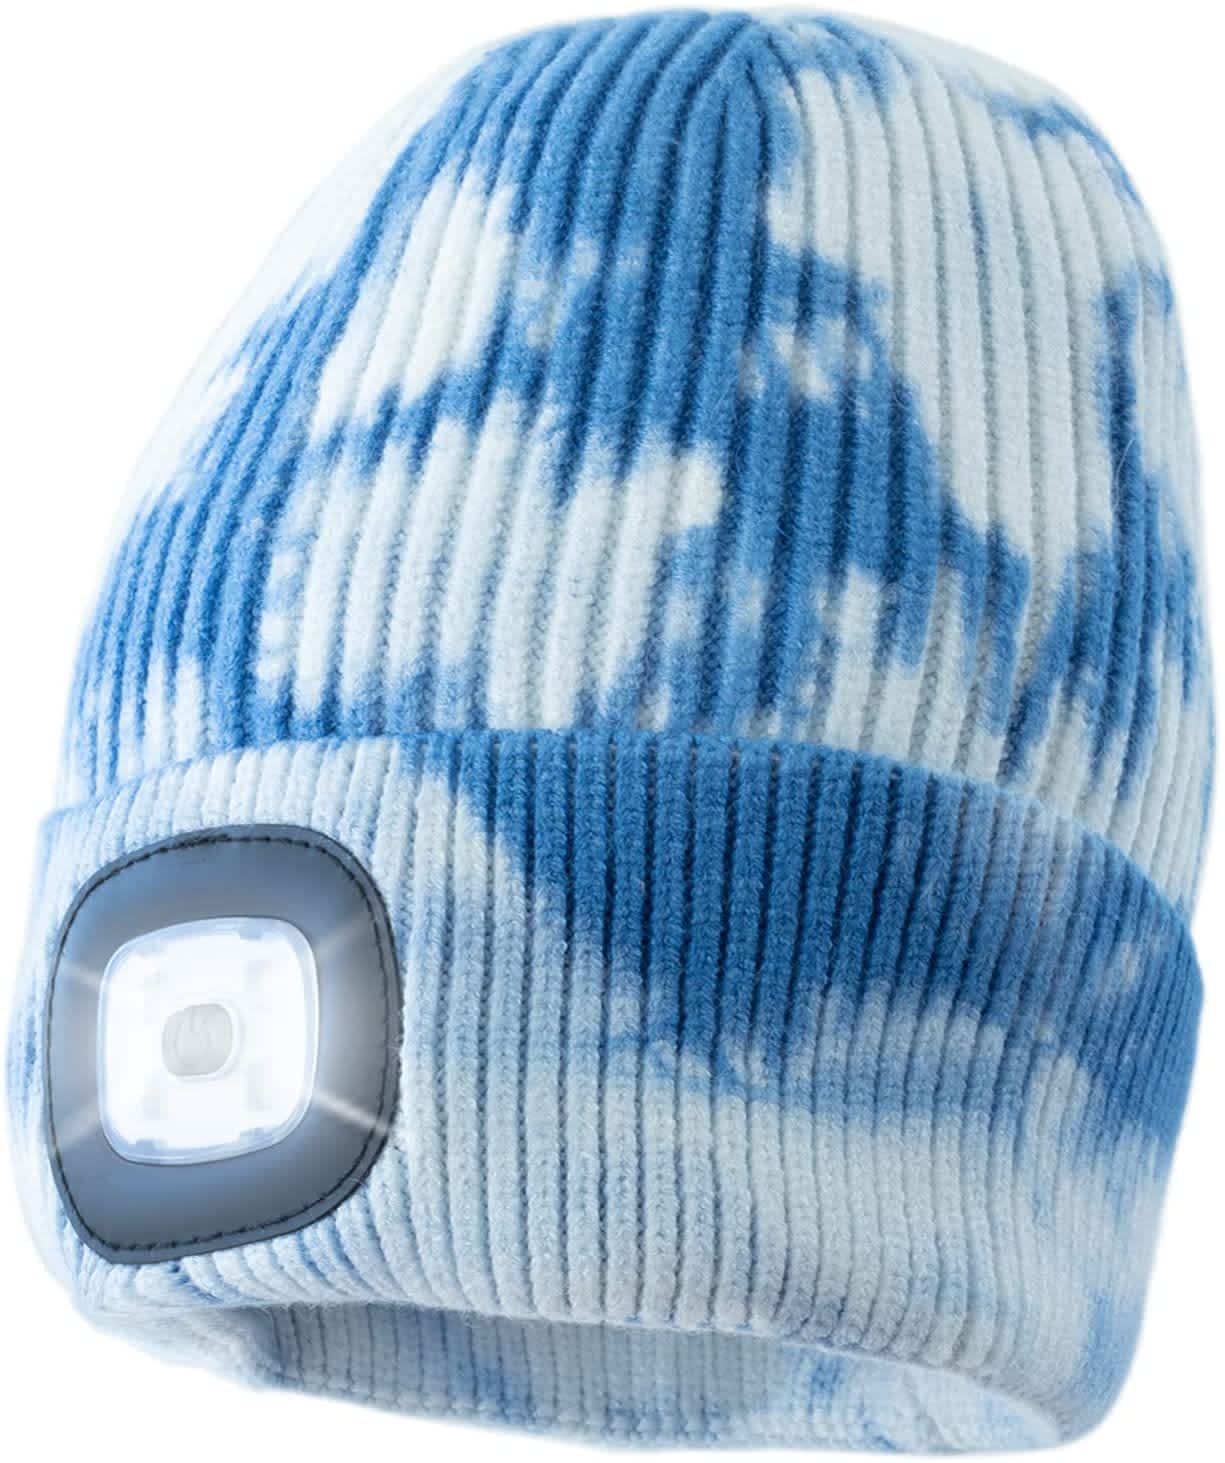 The Headlightz Hat Is the Perfect Stocking Stuffer for 2021 | Apartment Therapy